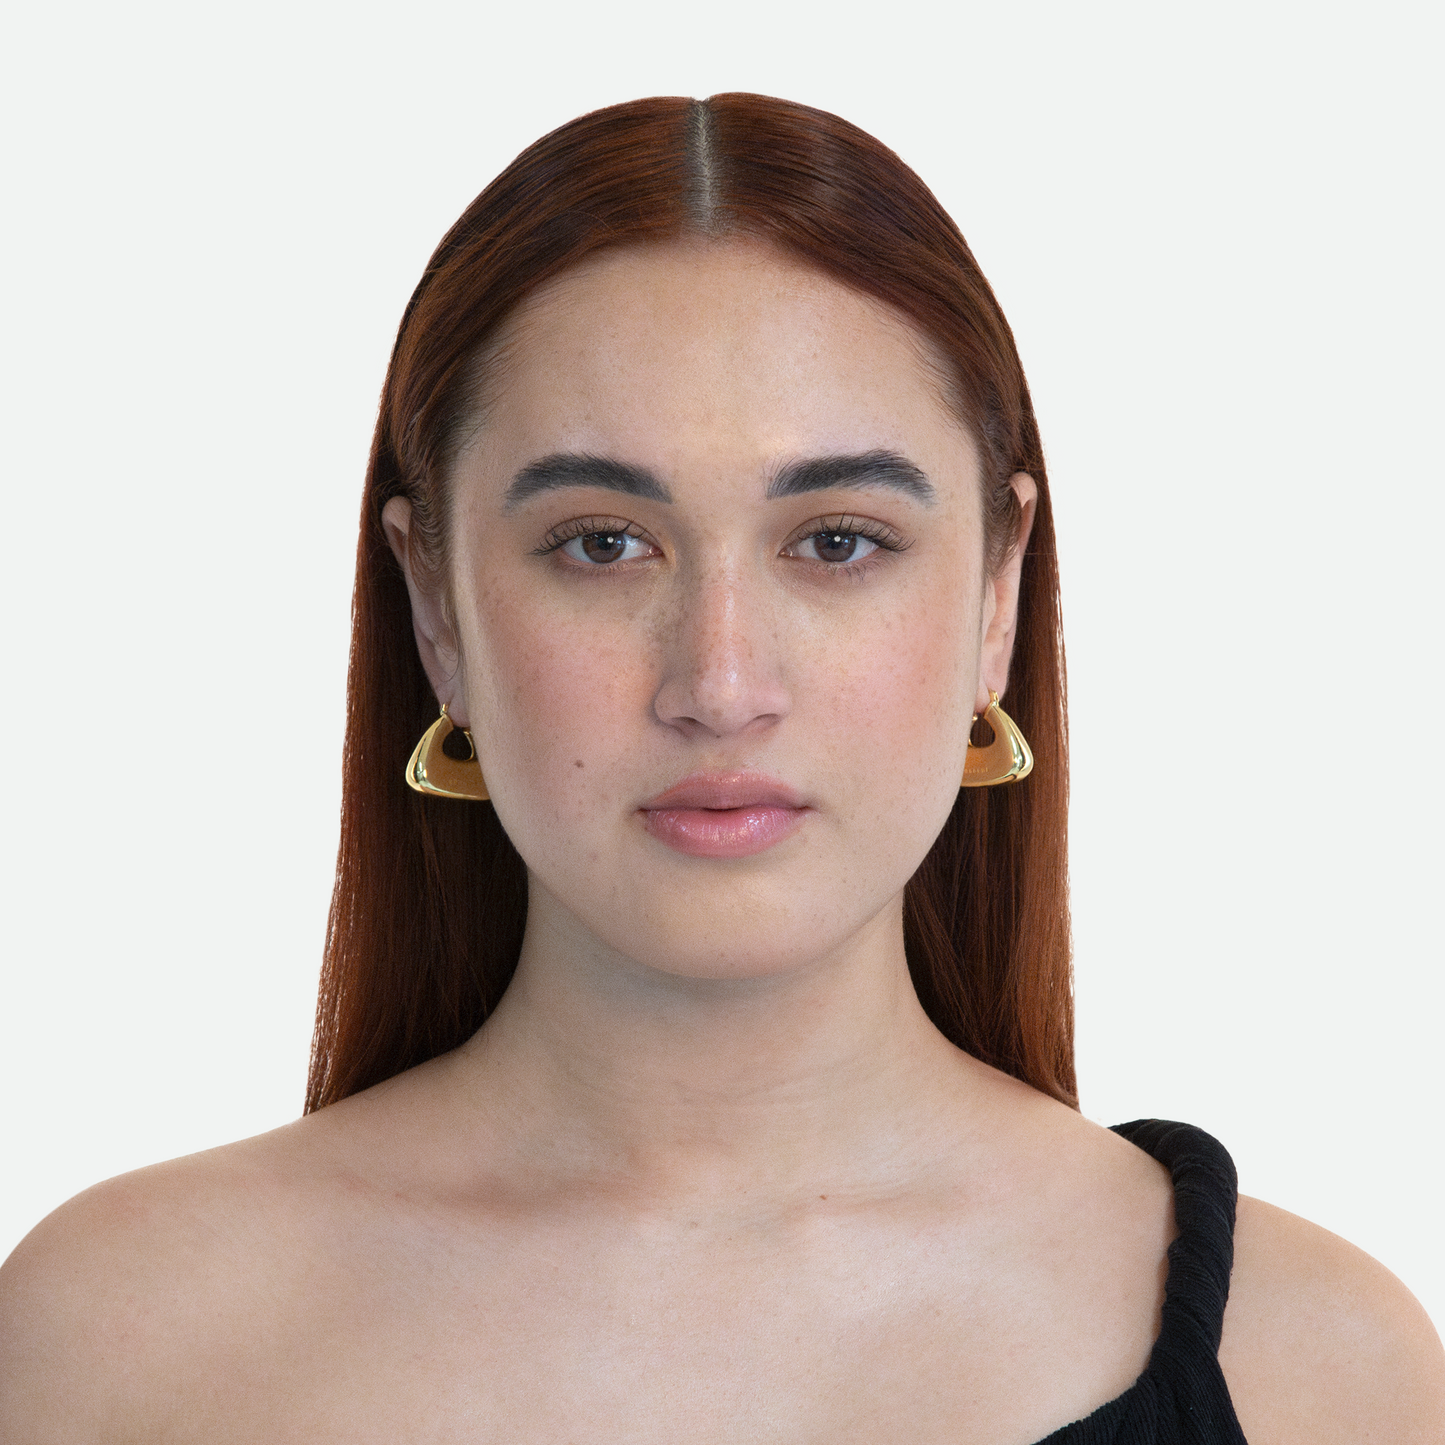 Model showcasing the simple and versatile Pouch earring with a gold inflated hoop design engraved with the Ruggeri logo, on a white background.